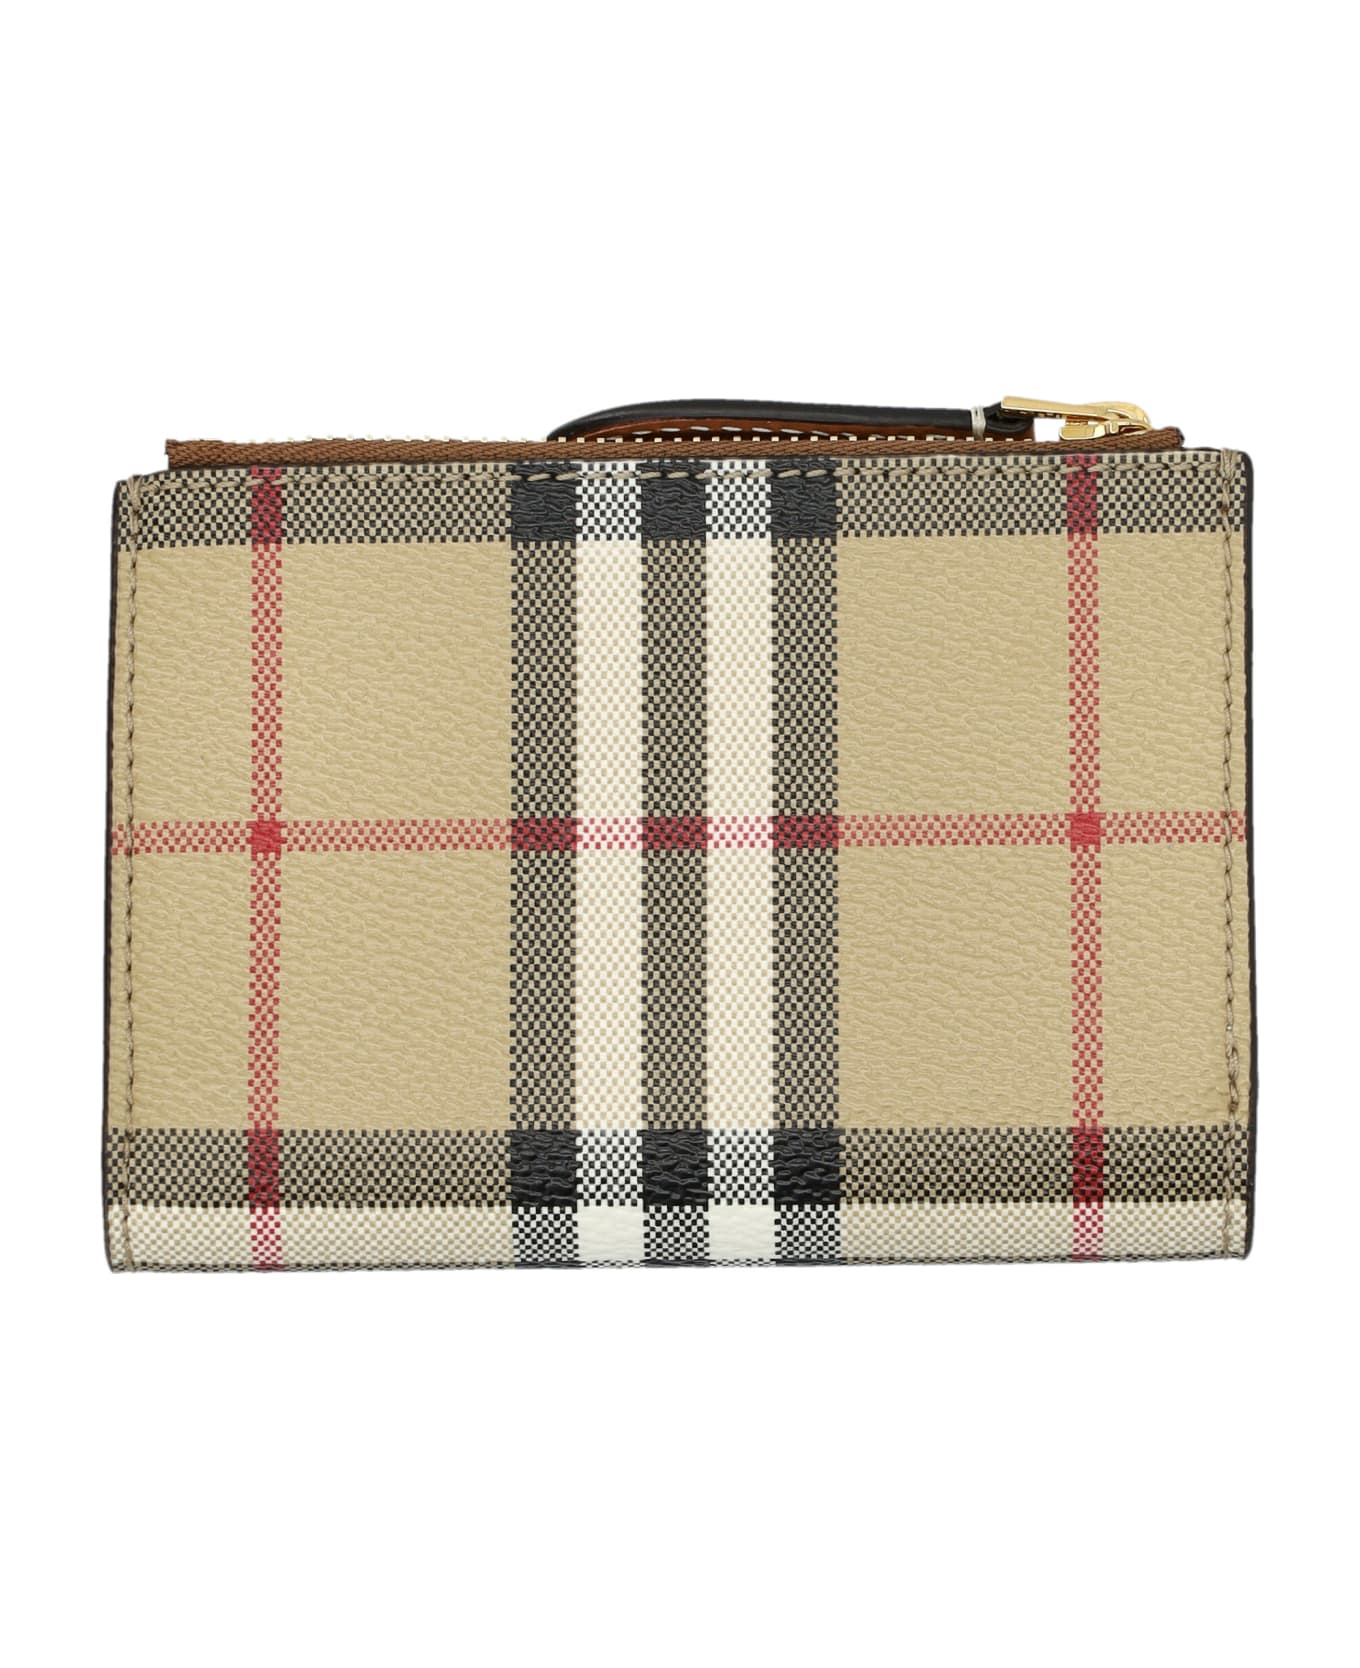 Burberry London Small Bifold Wallet - ARCHIVE BEIGE CHECK